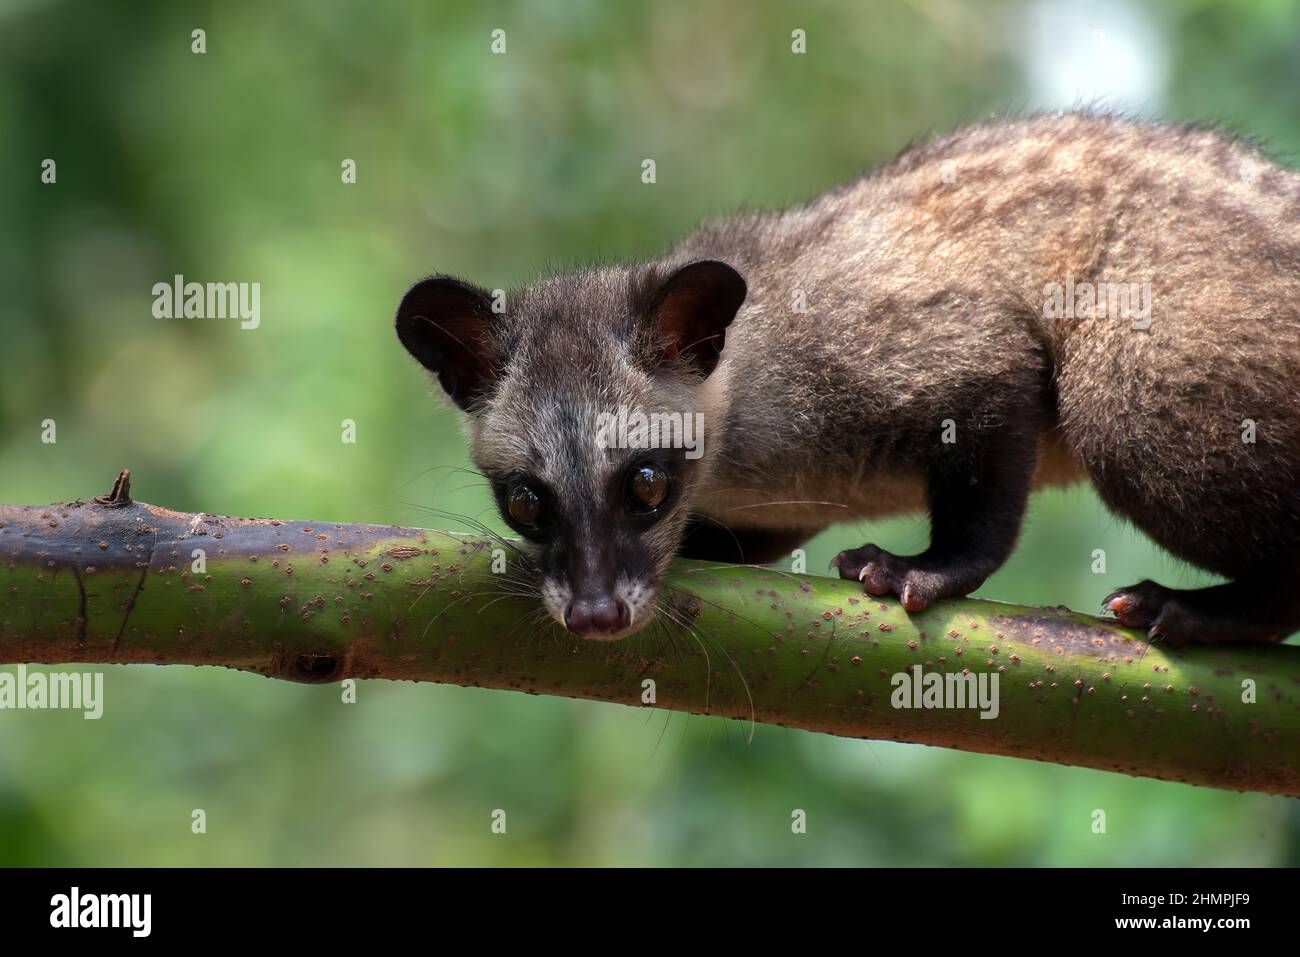 Portrait of a toddy cat on a branch, Indonesia Stock Photo